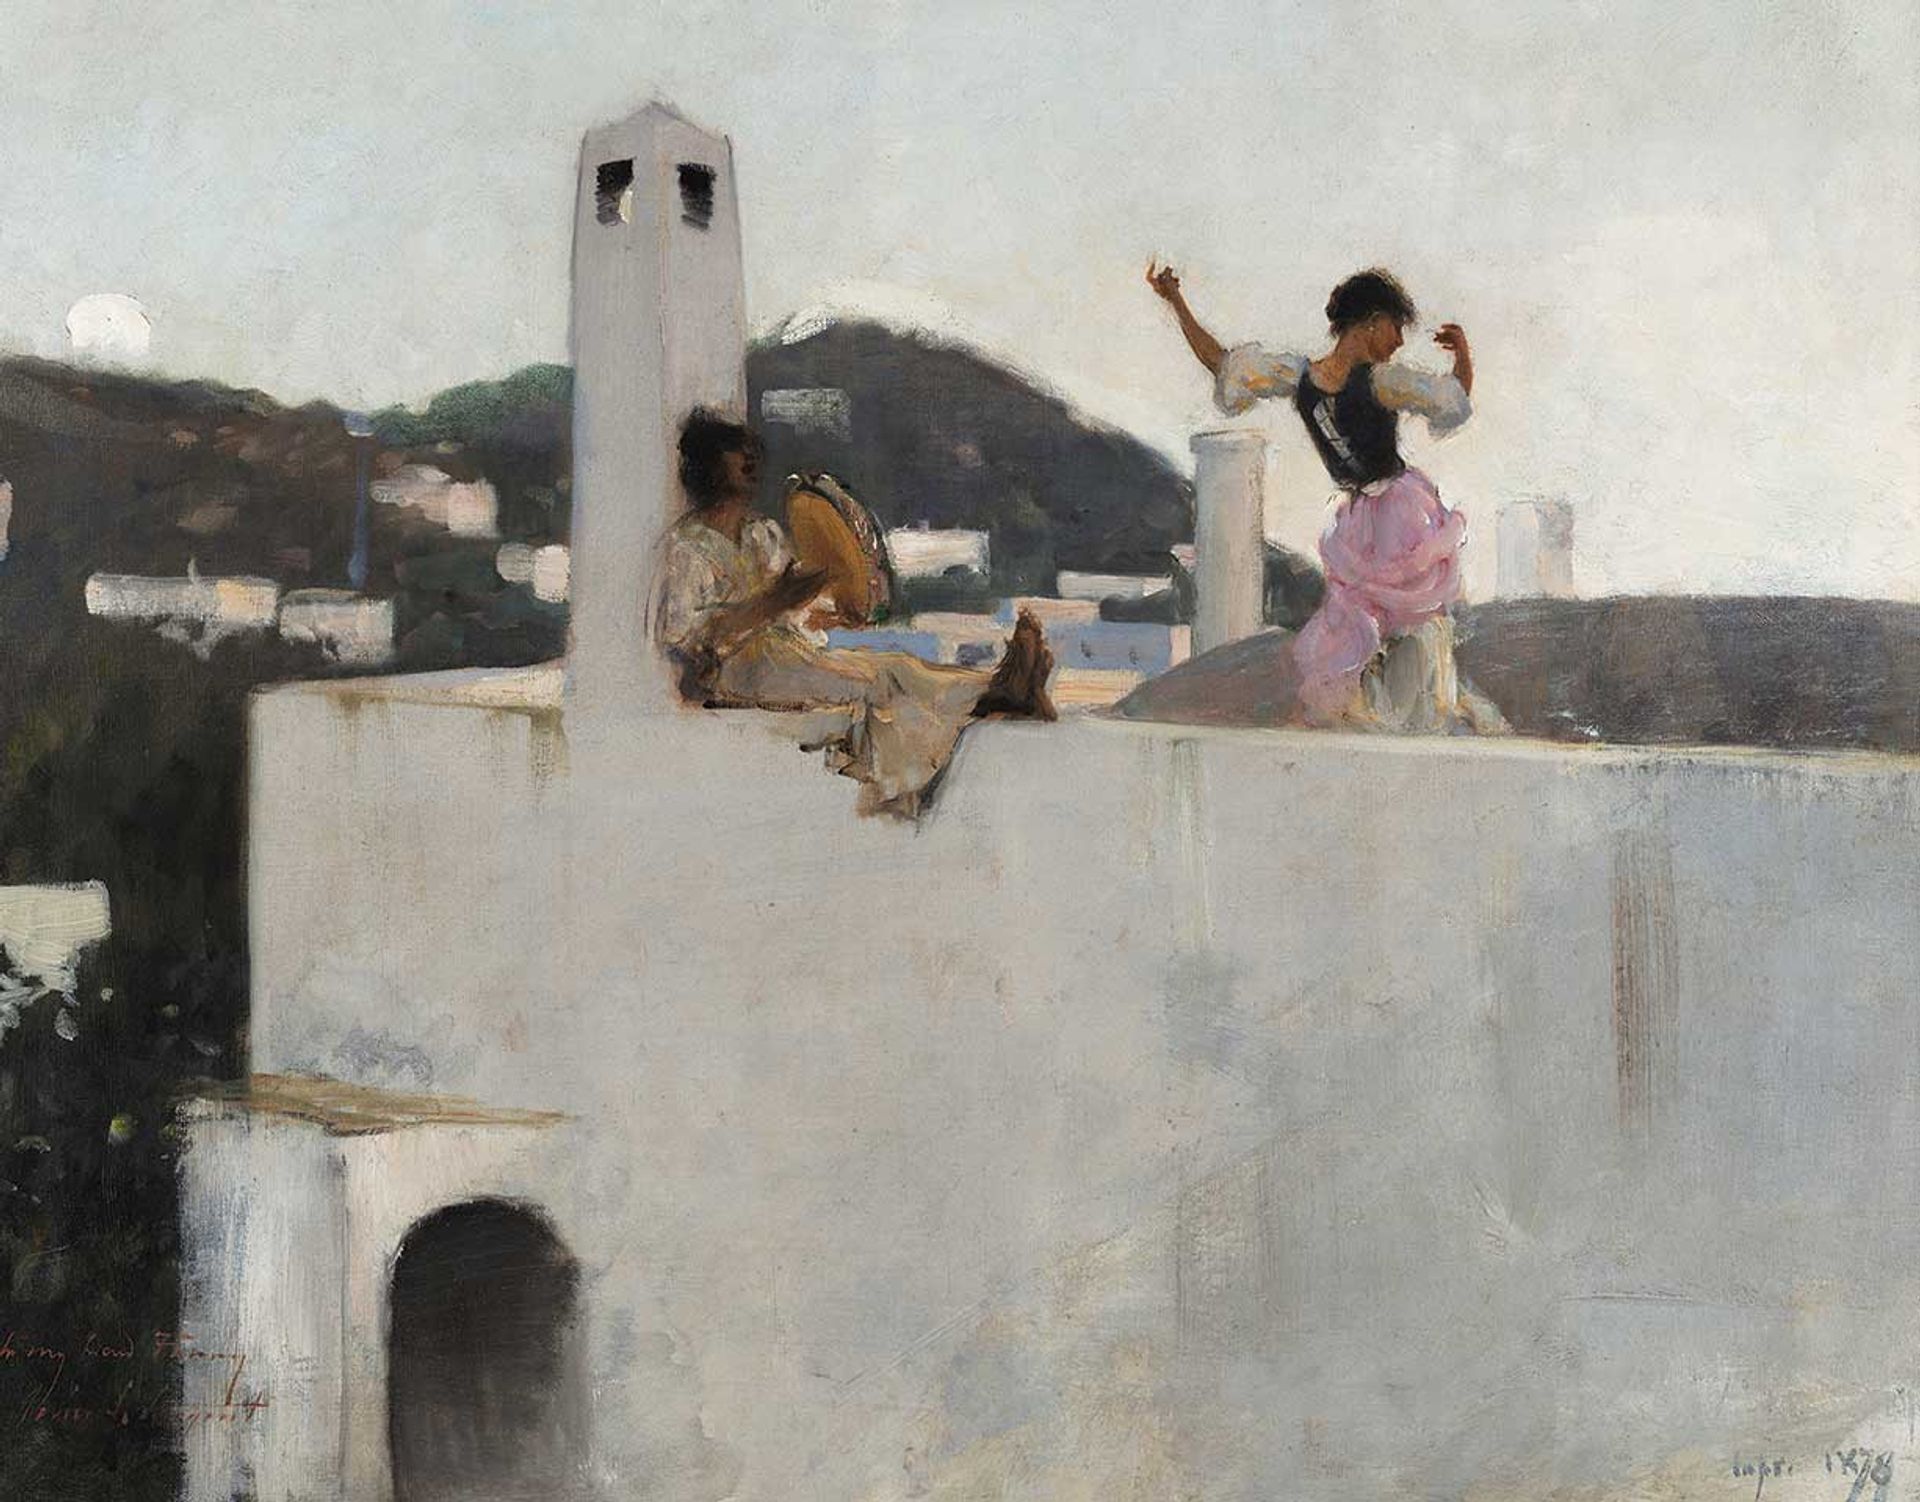 John Singer Sargent’s Capri Girl on a Rooftop (1878), depicting a scene on the Italian island. Sargent was an American expat and one of a number of artists who toured Europe and further afield in the late 19th and early 20th centuries © Crystal Bridges Museum of American Art, Bentonville, Arkansas